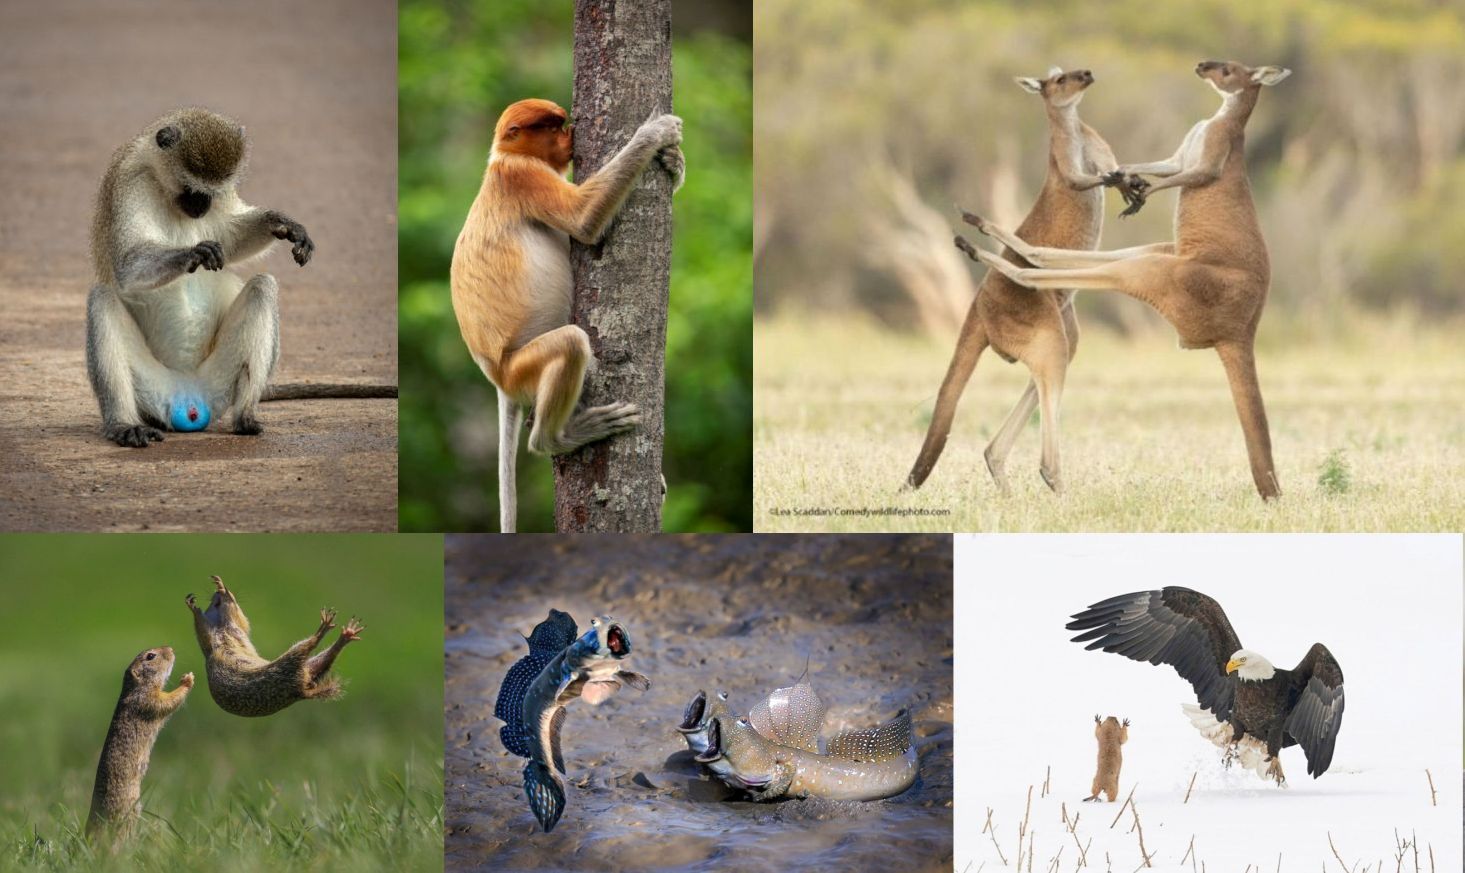 Finalists of 2021 Comedy Wildlife Photography Awards announced